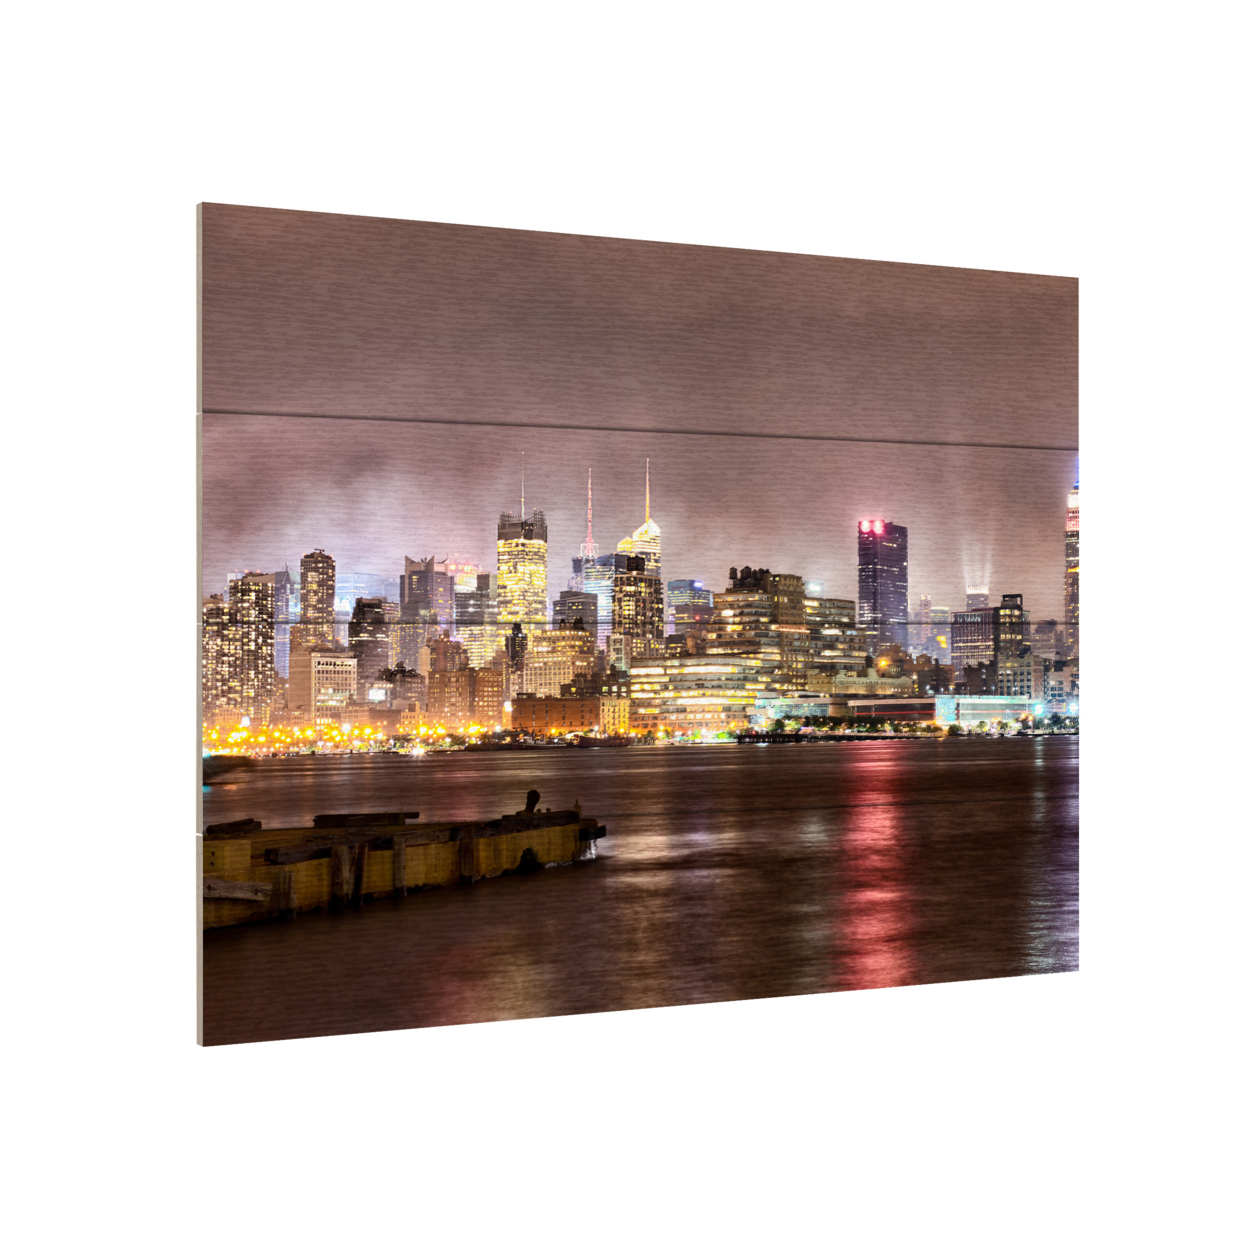 Wall Art 12 X 16 Inches Titled Midtown Manhatten Over The Hudson River Ready To Hang Printed On Wooden Planks